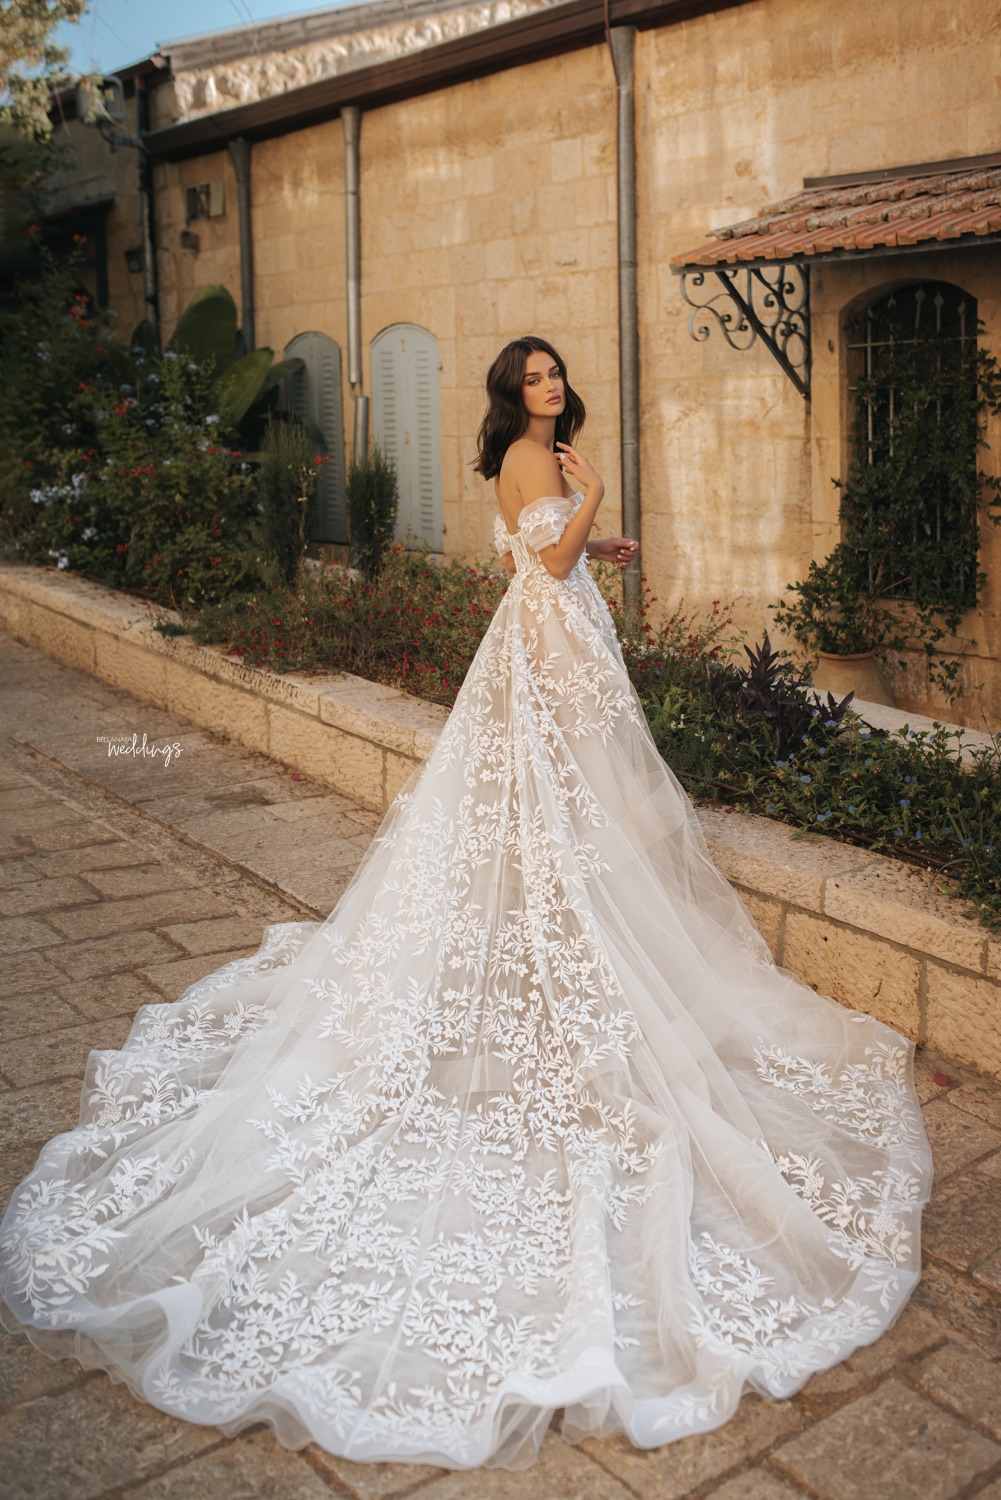 2022 Brides, We've Got Gowns That'll Make You The Talk Of The Town For Centuries